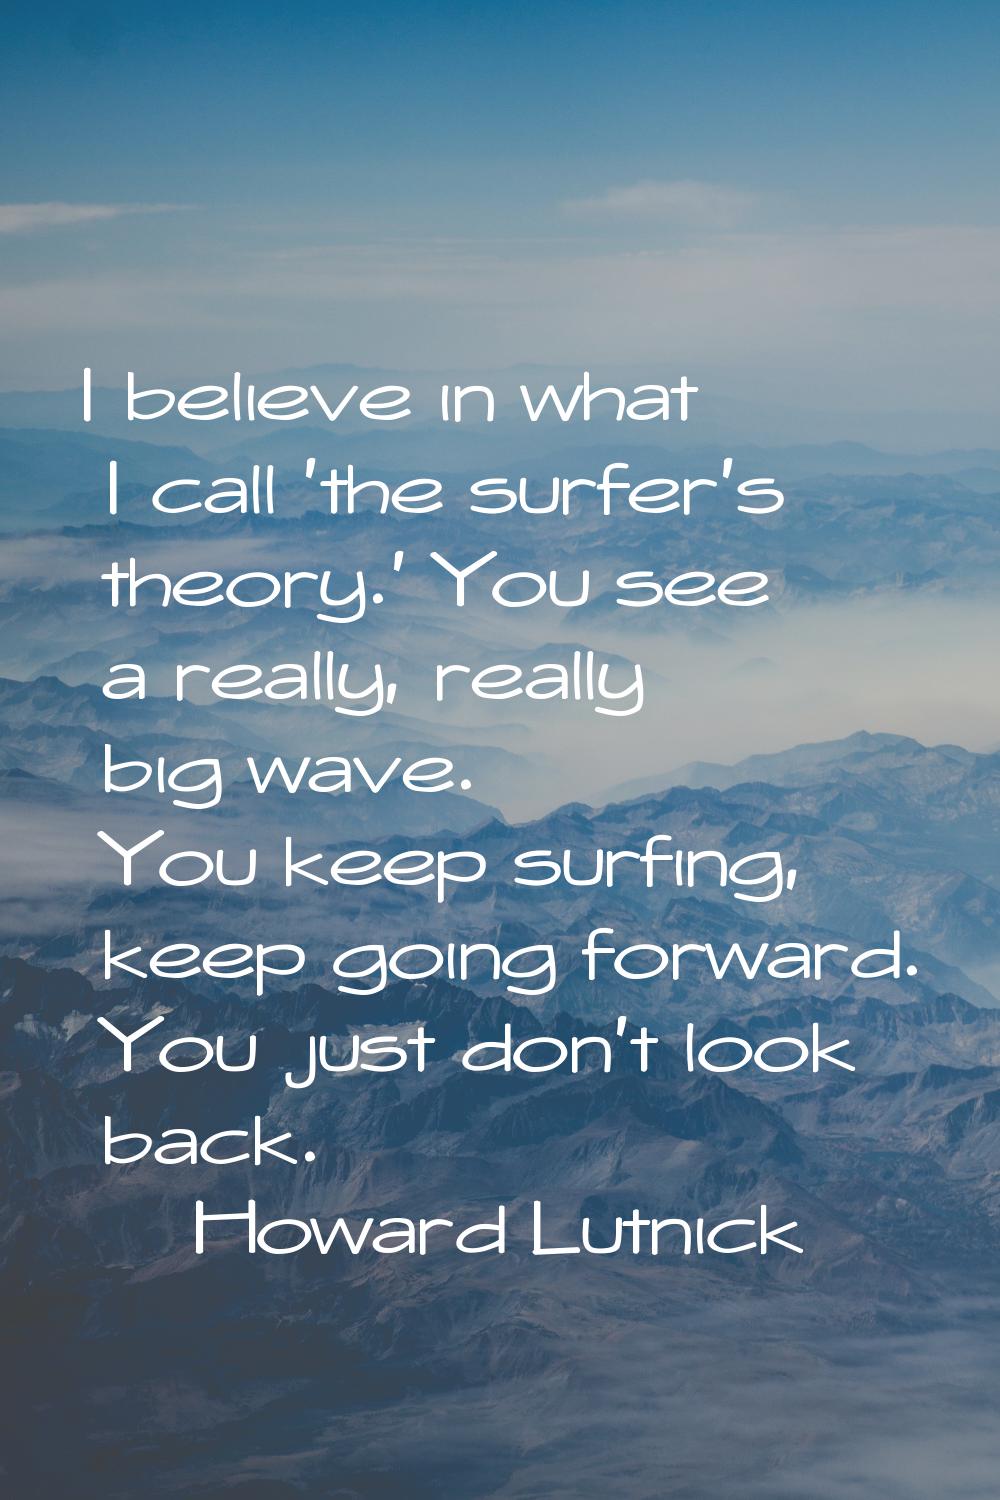 I believe in what I call 'the surfer's theory.' You see a really, really big wave. You keep surfing